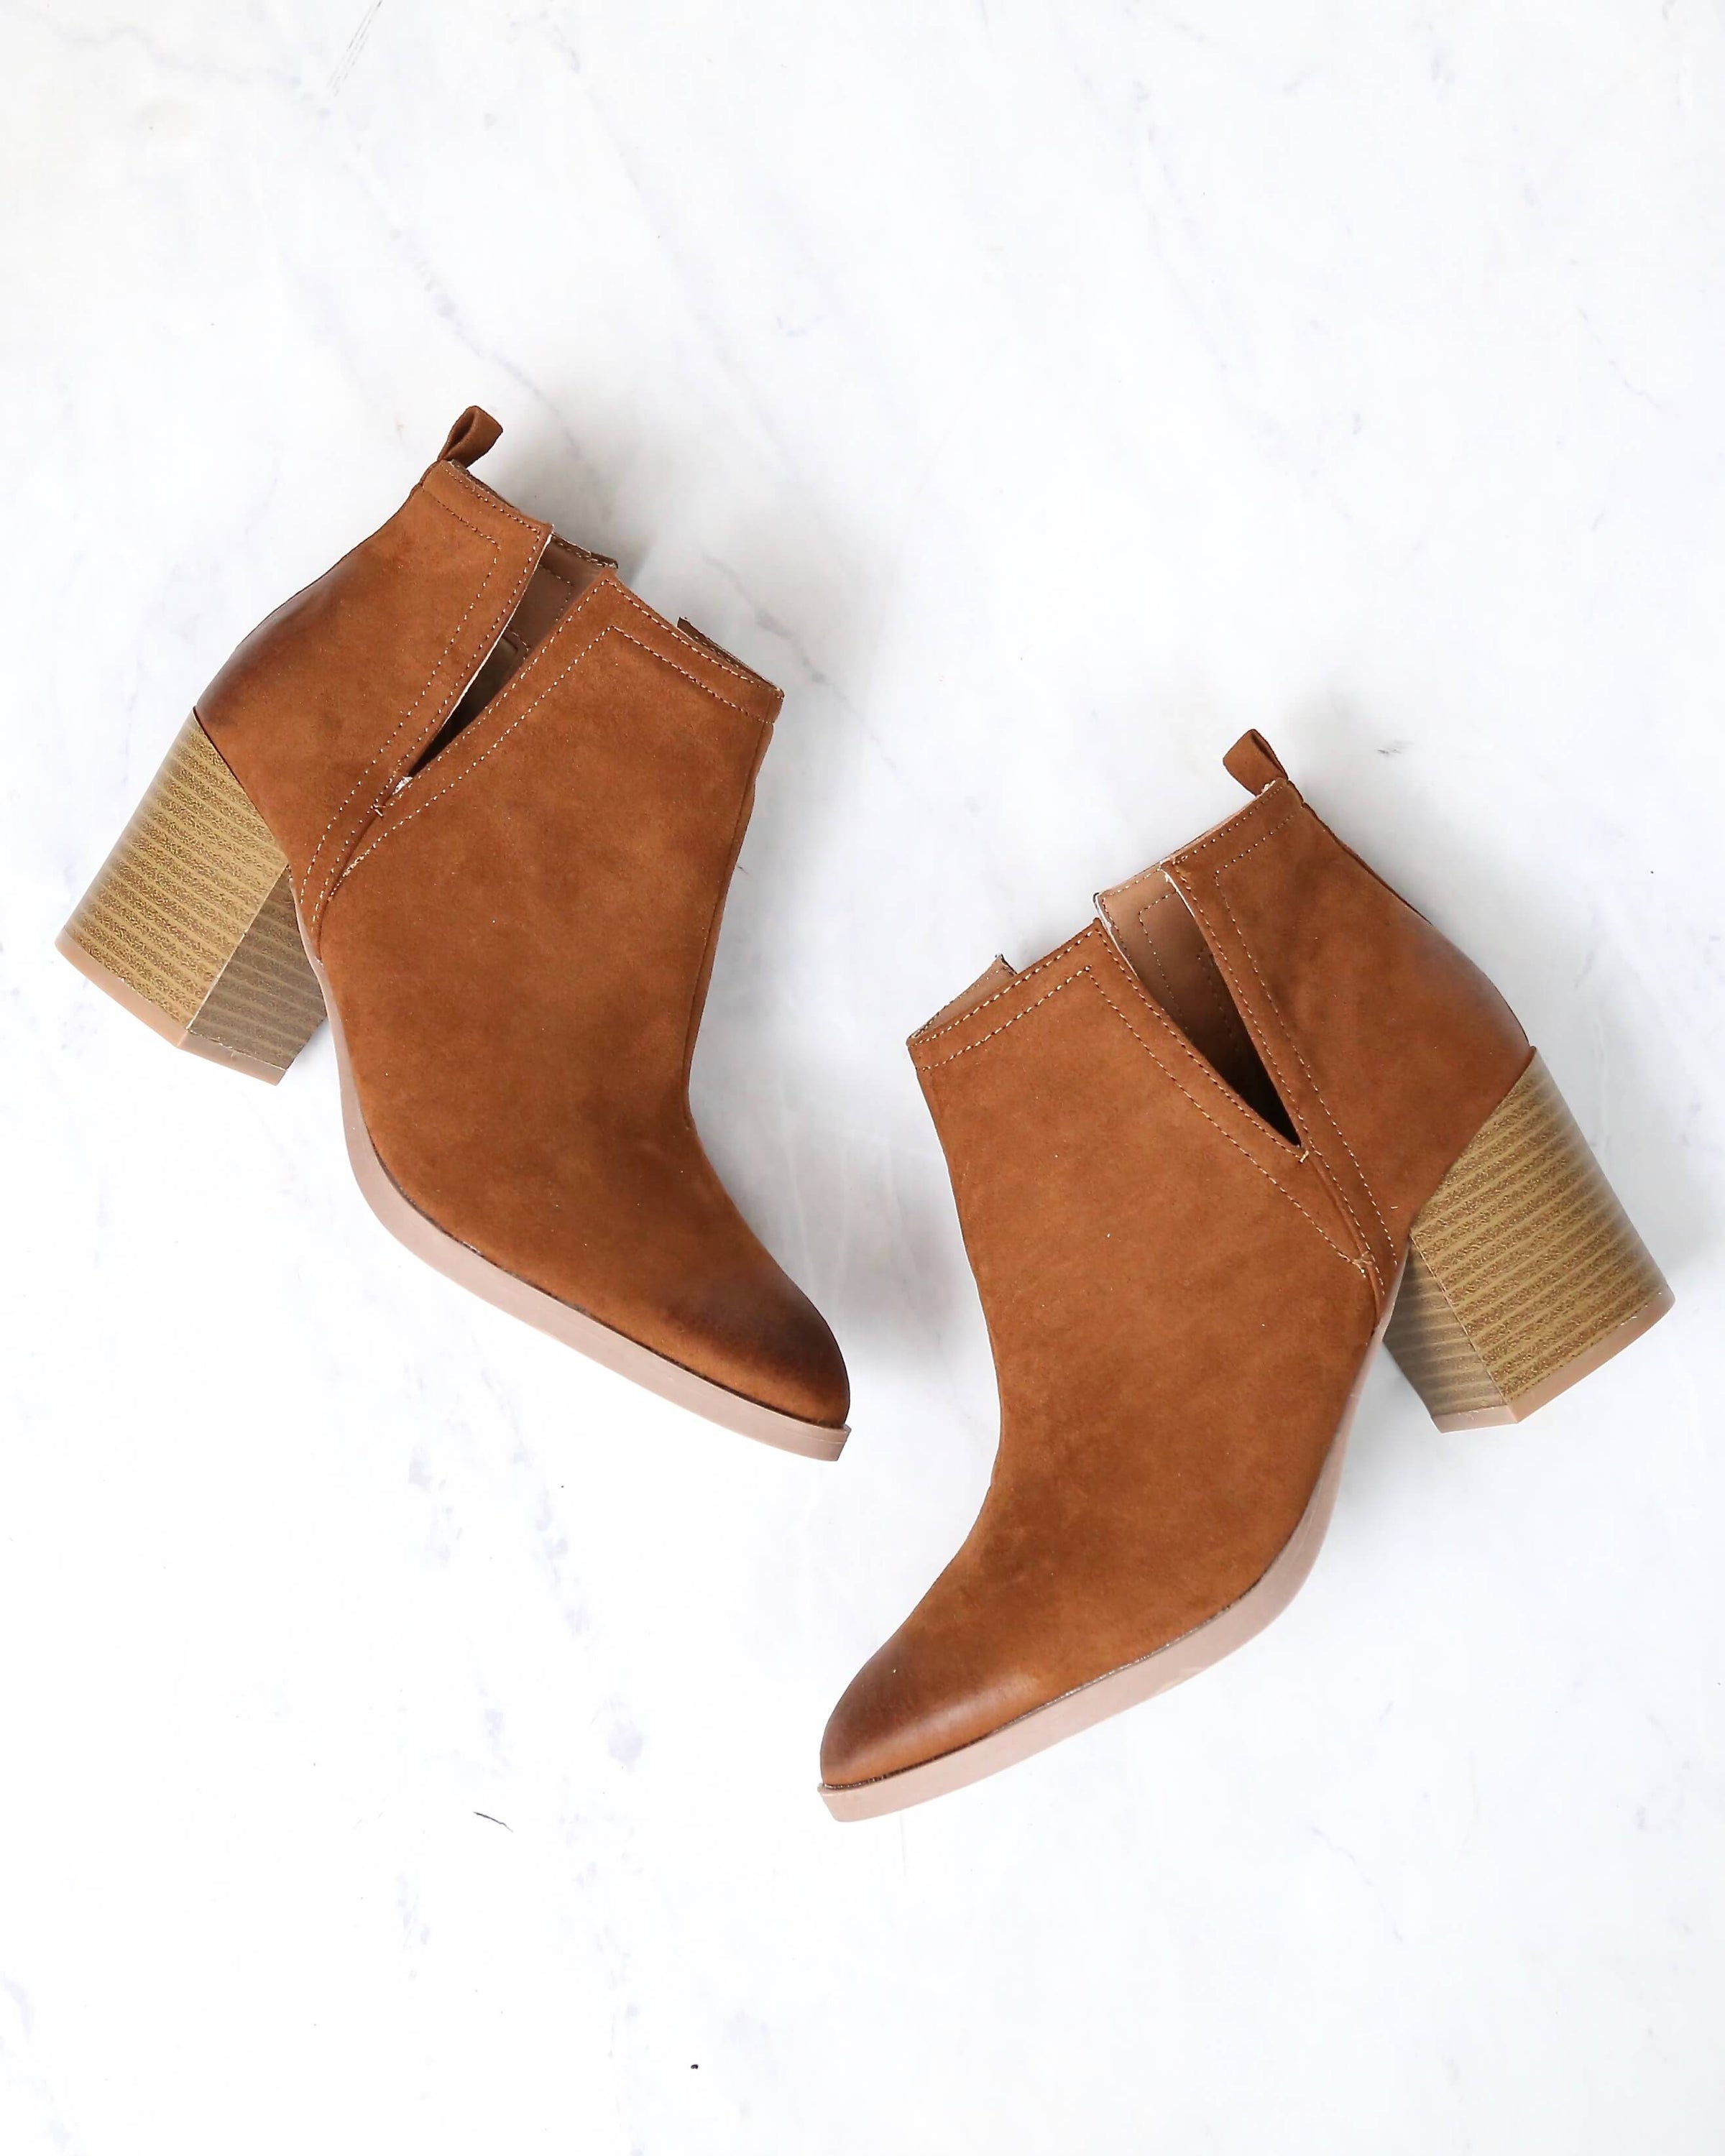 ankle boots with side slits